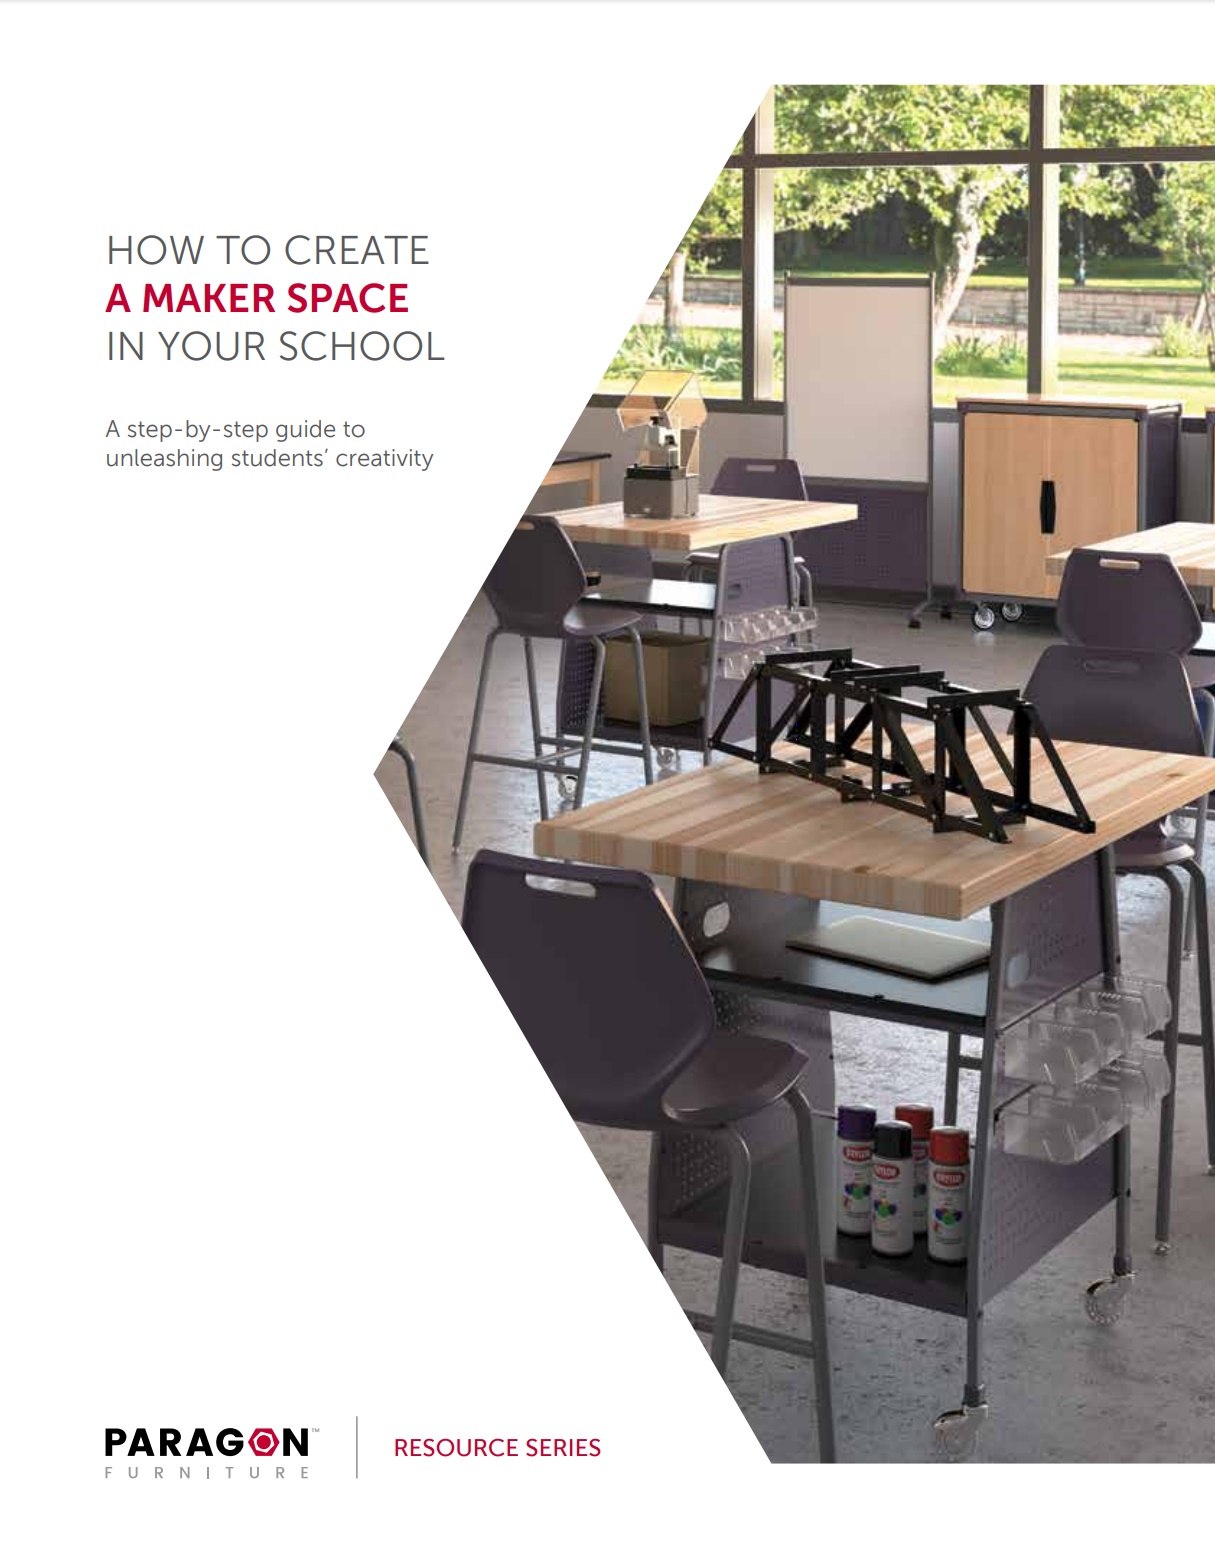 How-To-Create-A-Makerspace-In-Your-School-Guide-Paragon-Furniture